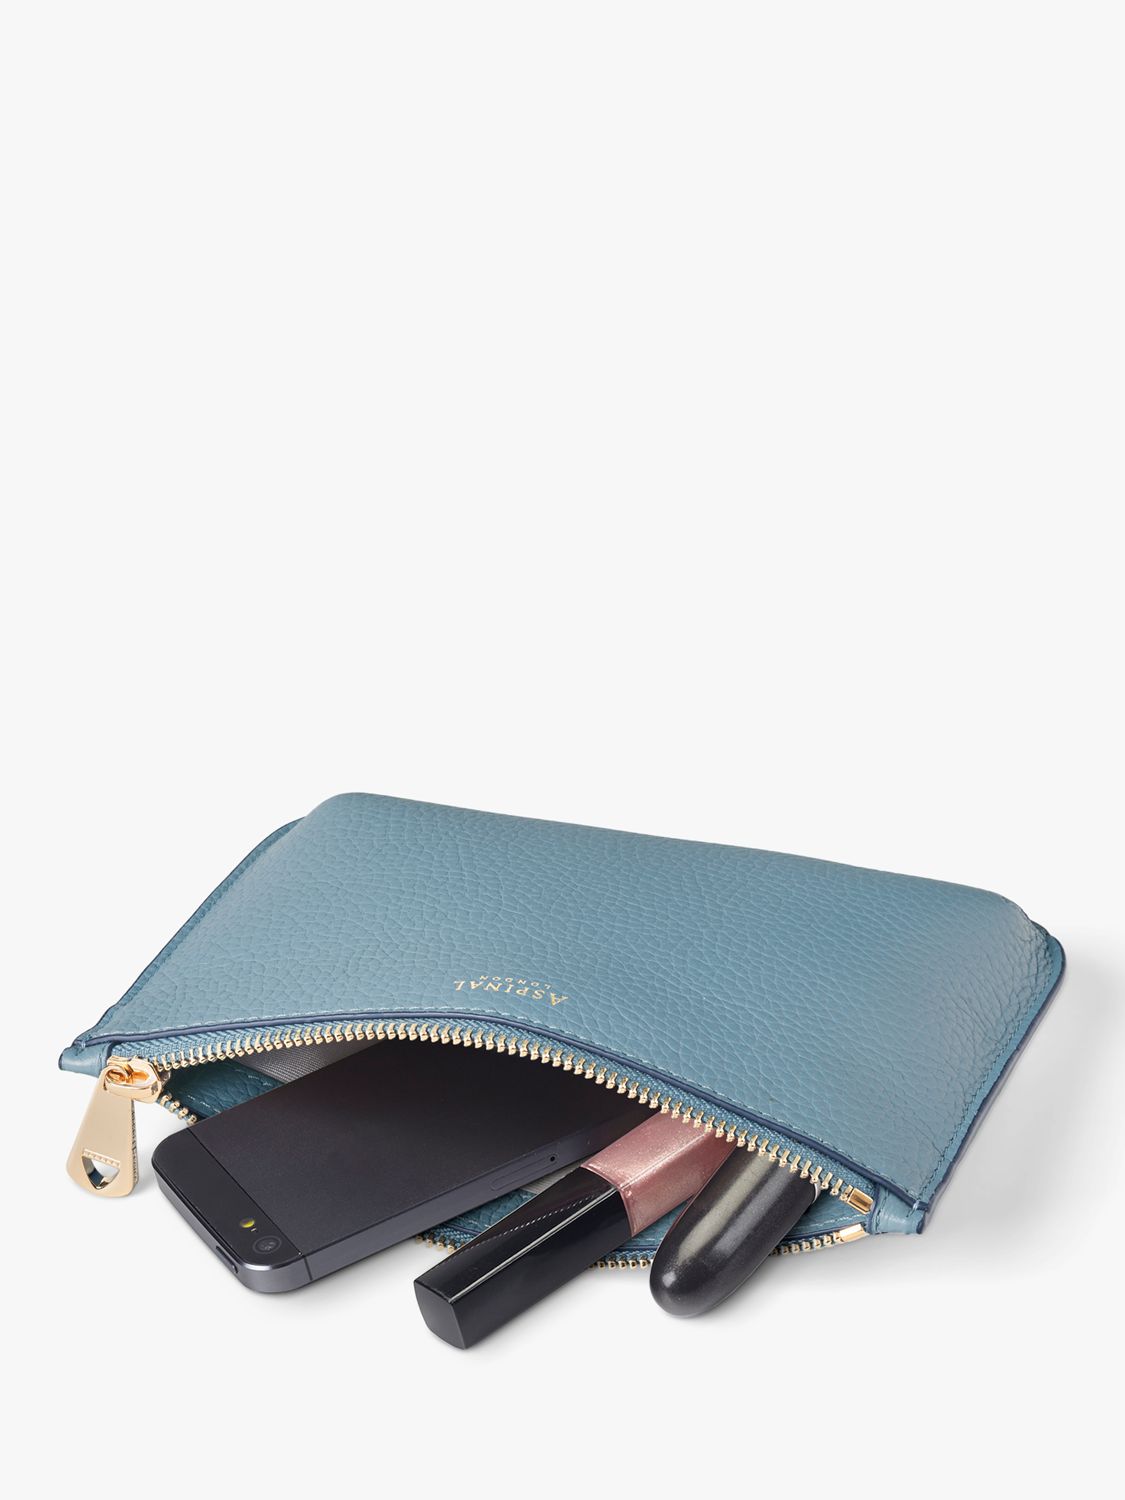 Buy Aspinal of London Medium Ella Pebble Grain Leather Pouch Online at johnlewis.com